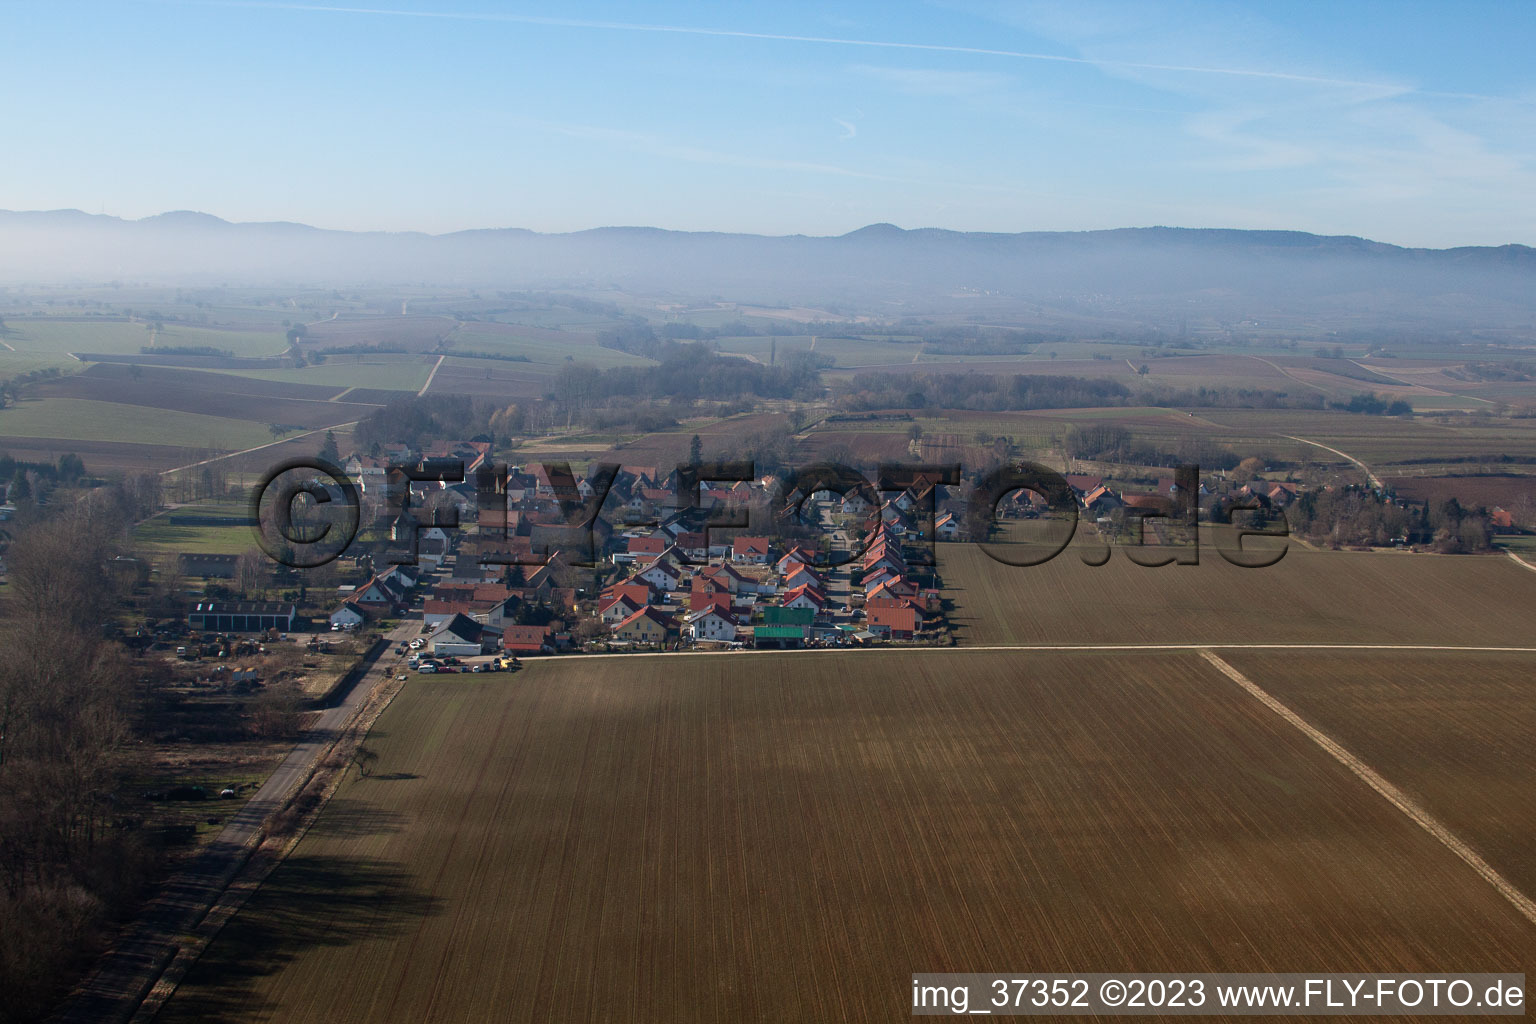 District Kleinsteinfeld in Niederotterbach in the state Rhineland-Palatinate, Germany seen from a drone